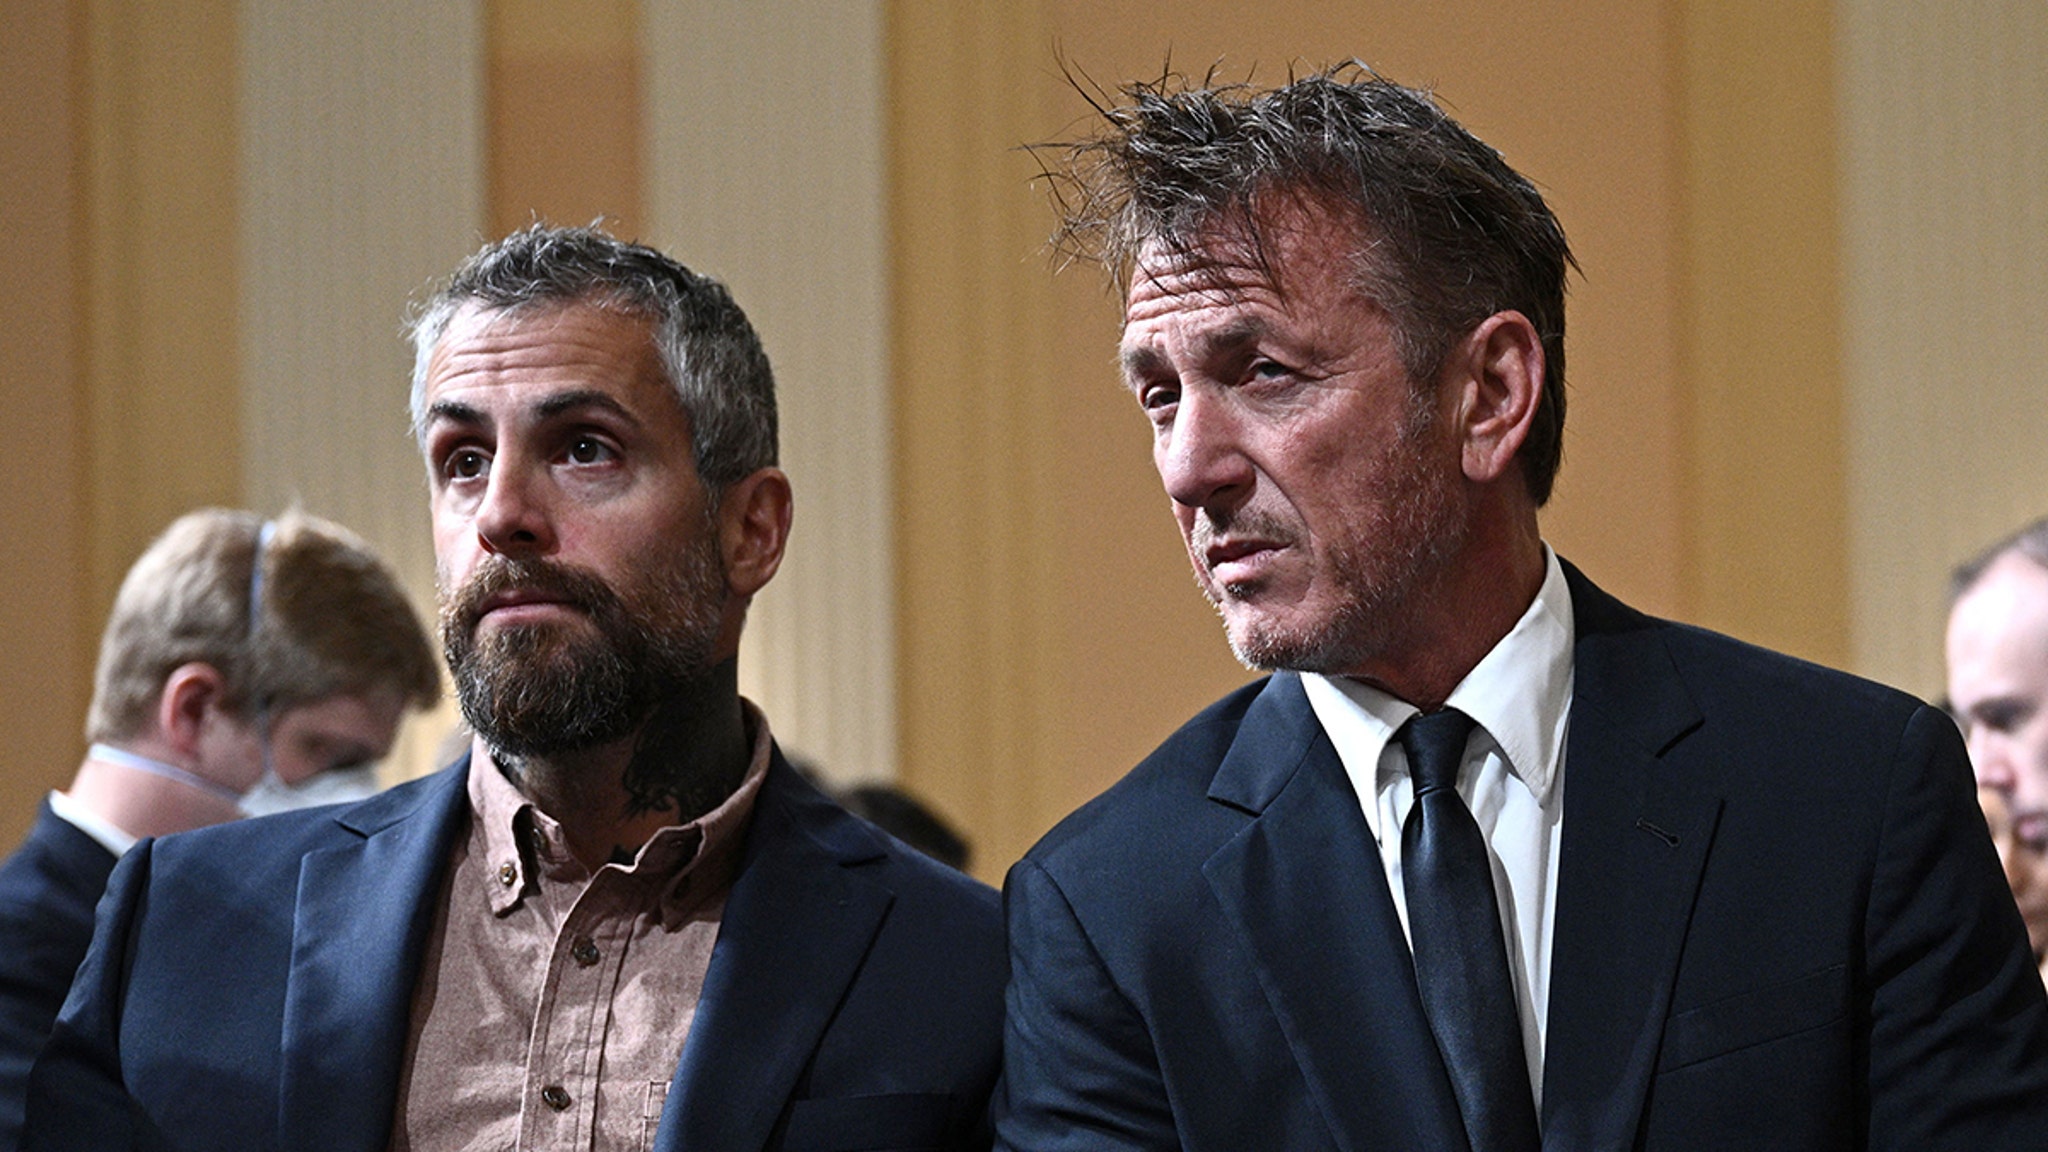 Sean Penn On Capitol Hill for House Committee's January 6th Hearing